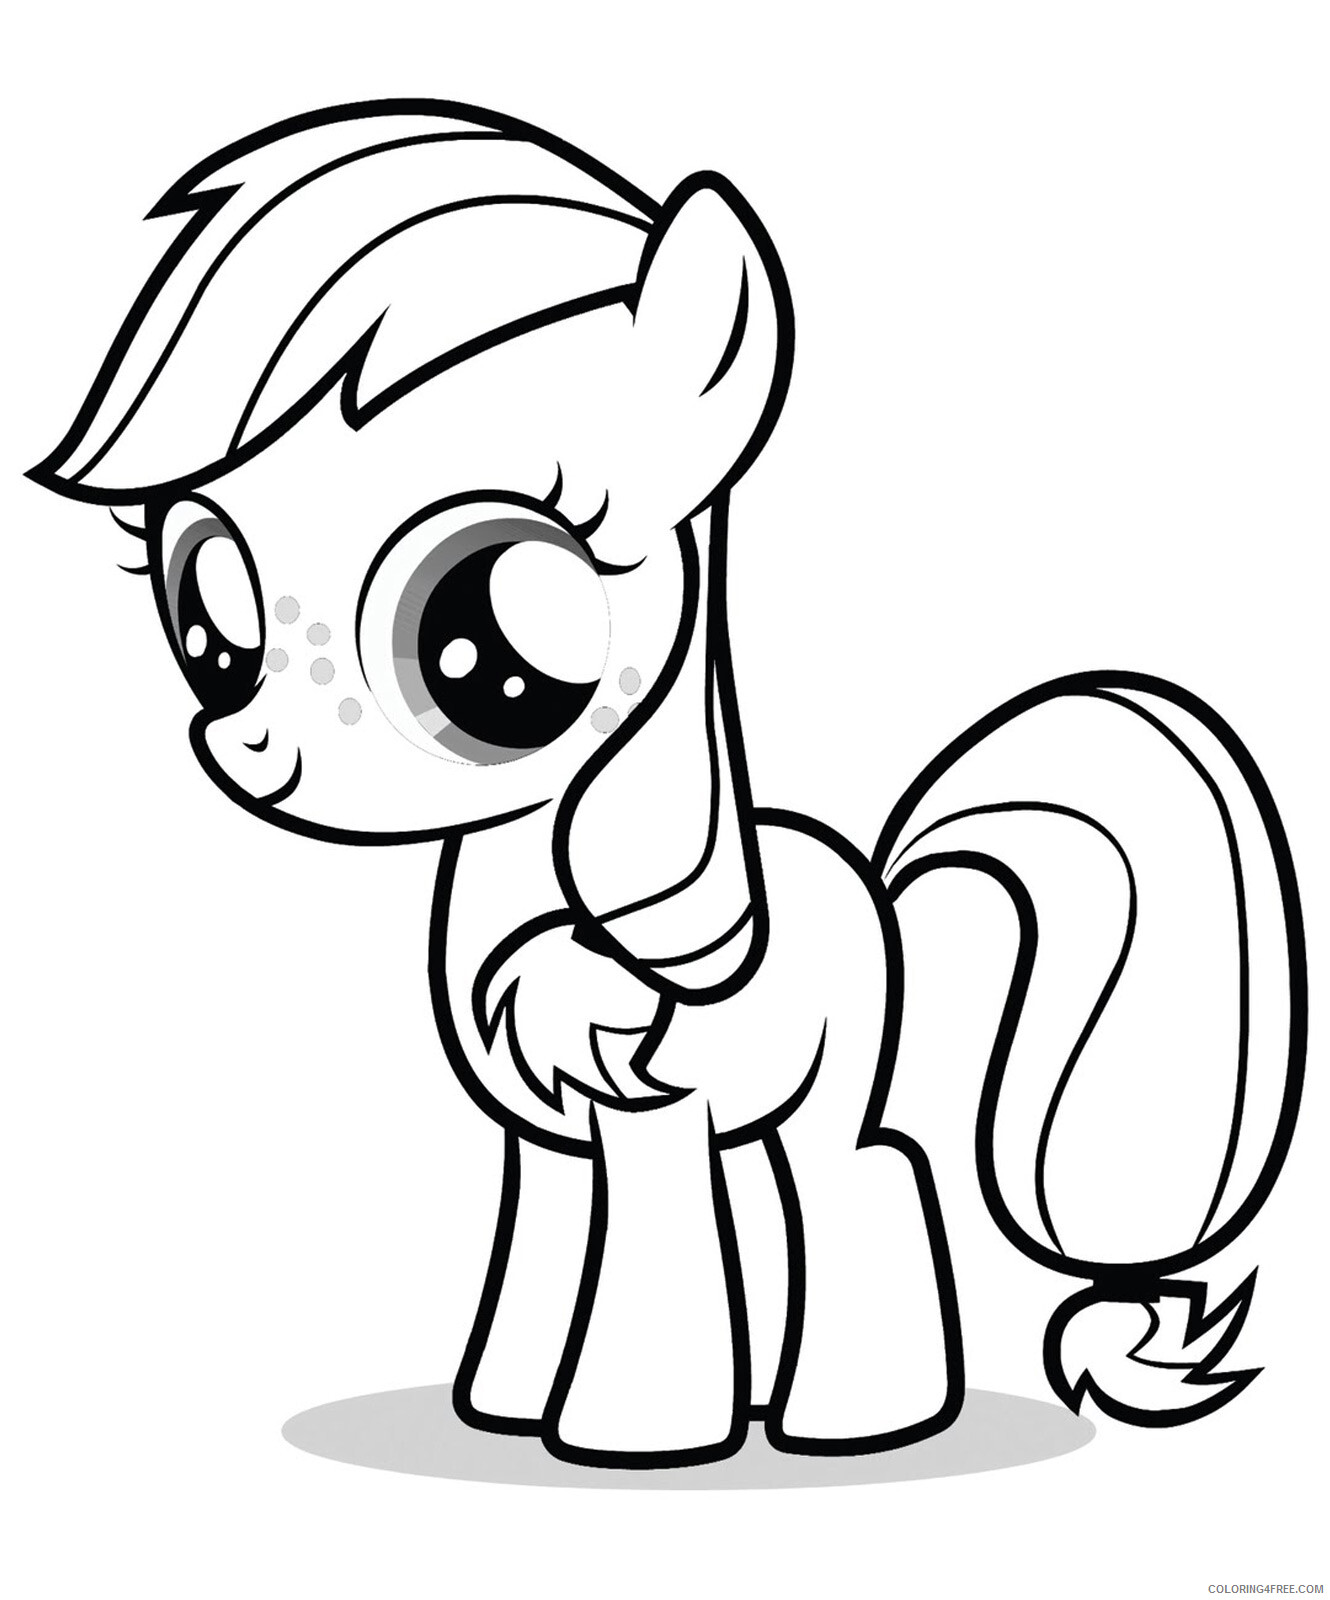 MLP Coloring Pages MLP Printable 2021 4142 Coloring4free